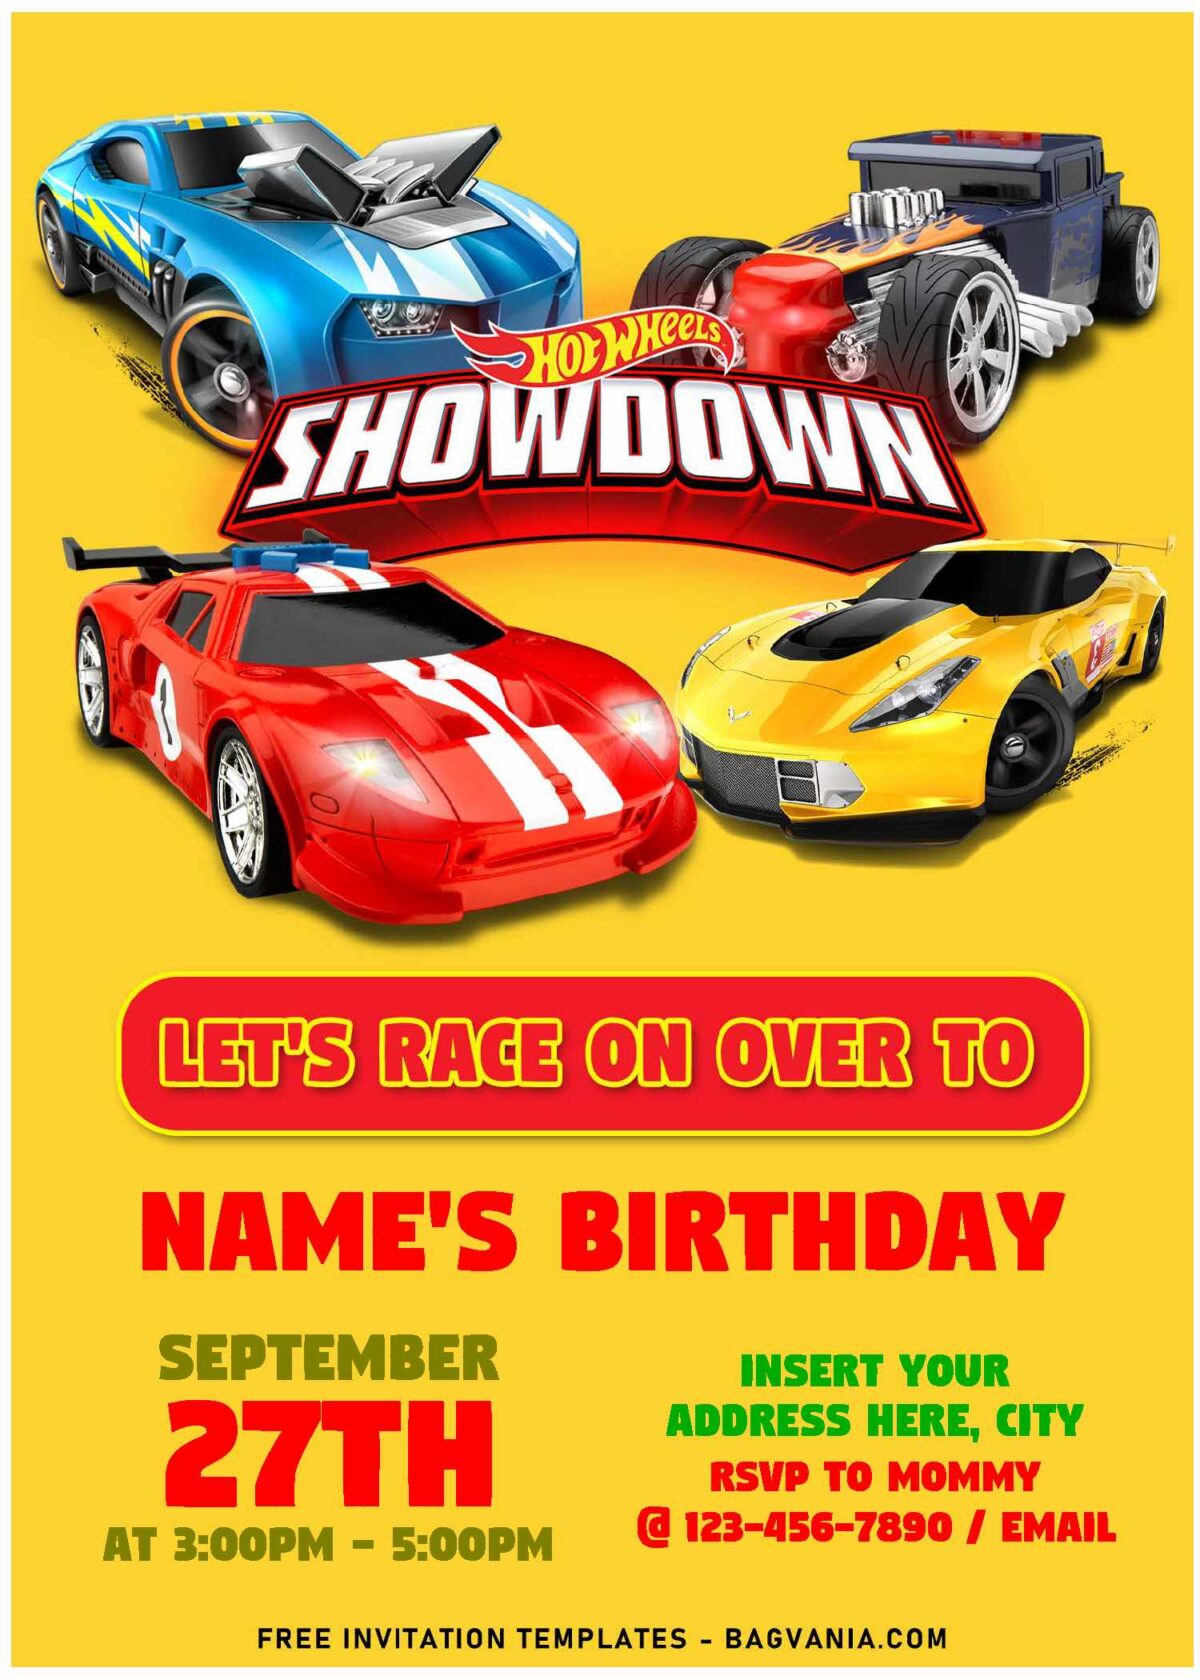 (Free Editable PDF) Race With The Winner Hot Wheels Birthday Invitation Templates with ford GT and Hotrod